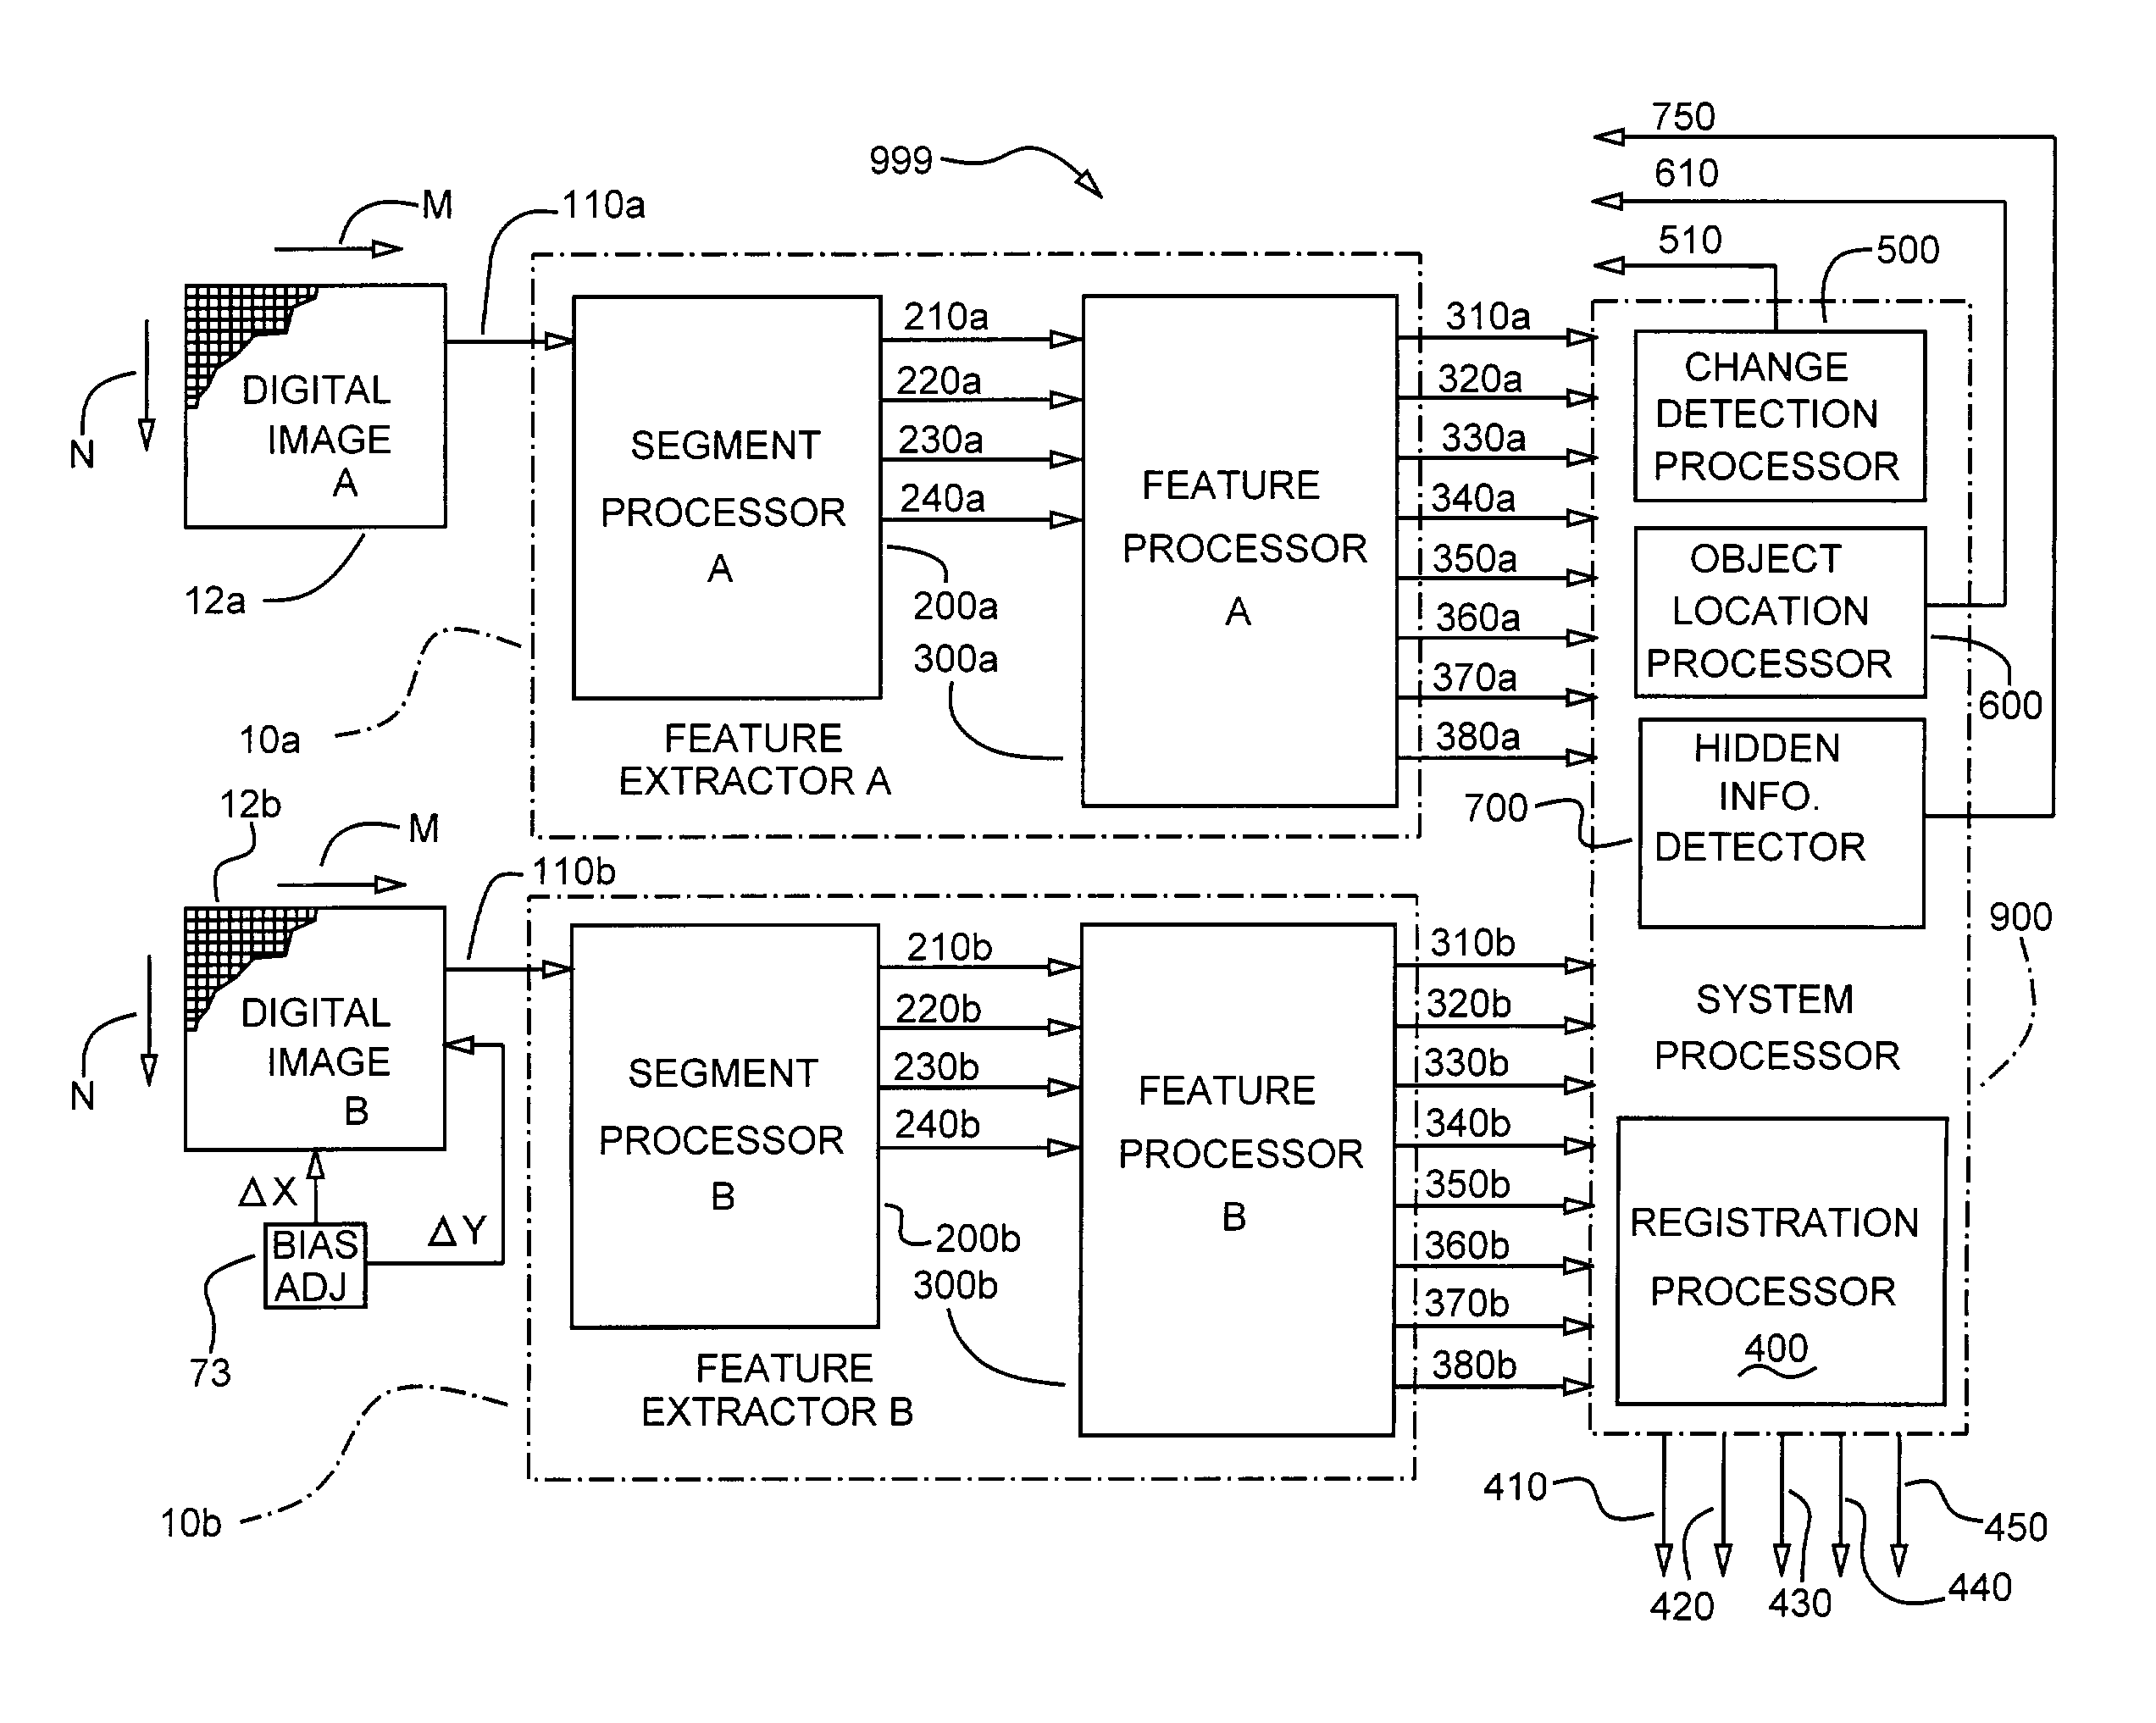 Apparatus and method for characterizing digital images using a two axis image sorting technique